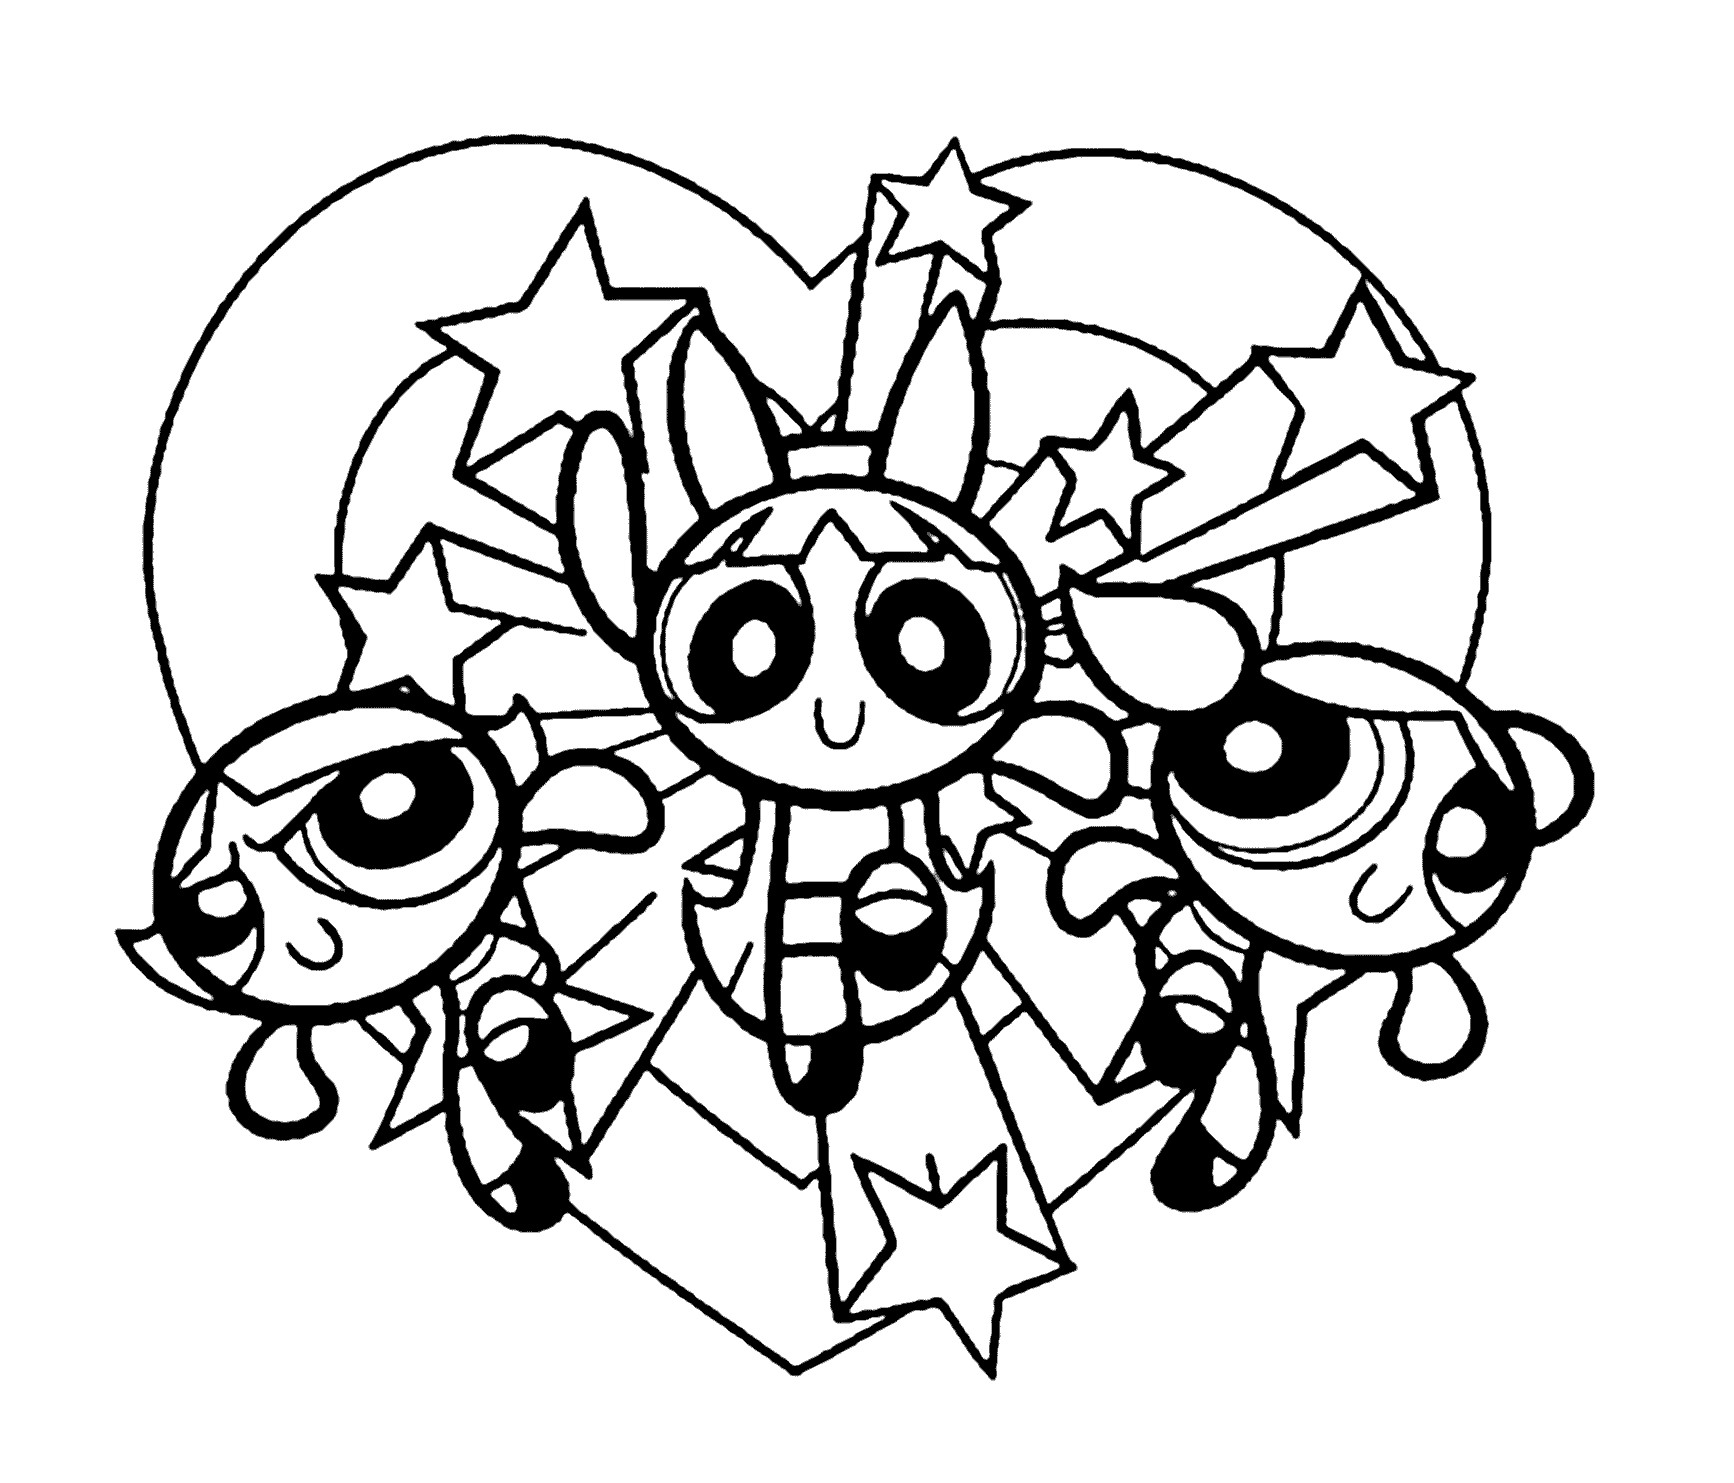 Powerpuff Girls Coloring Sheet
 12 printable pictures of powerpuff girls page Print